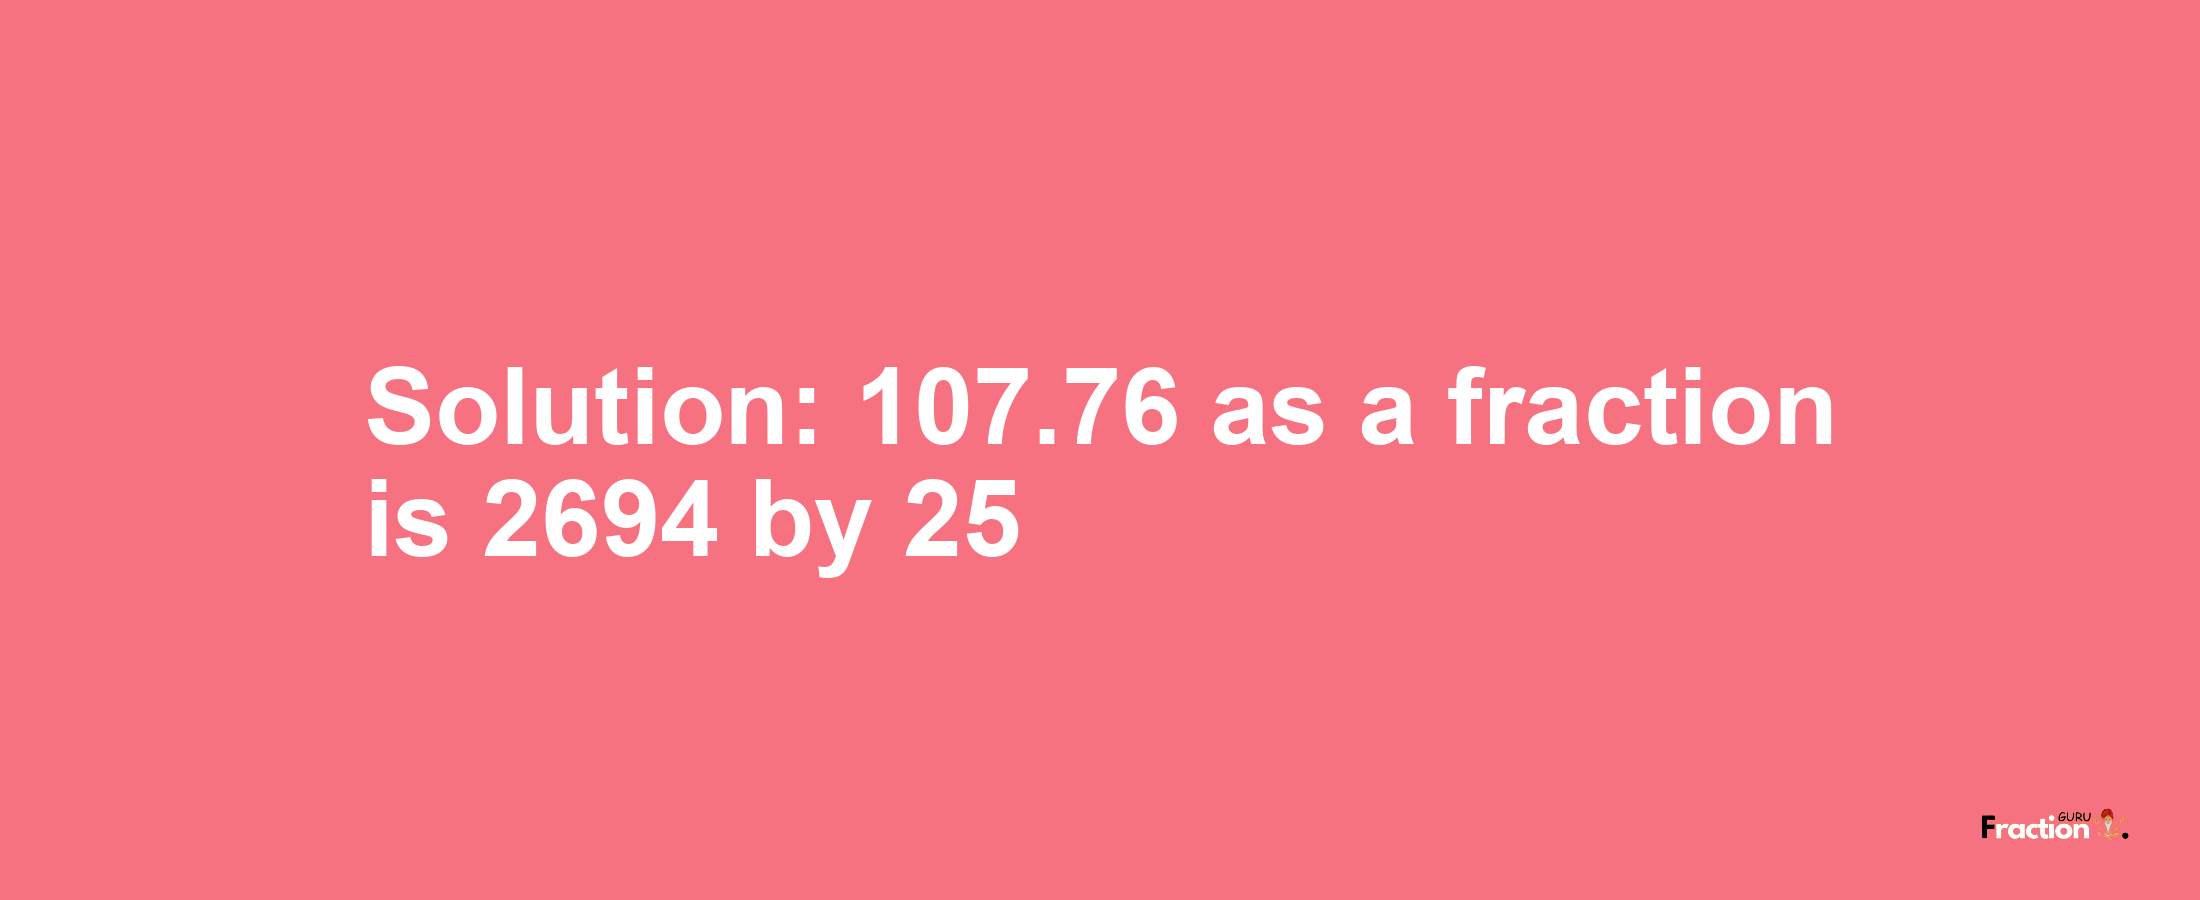 Solution:107.76 as a fraction is 2694/25